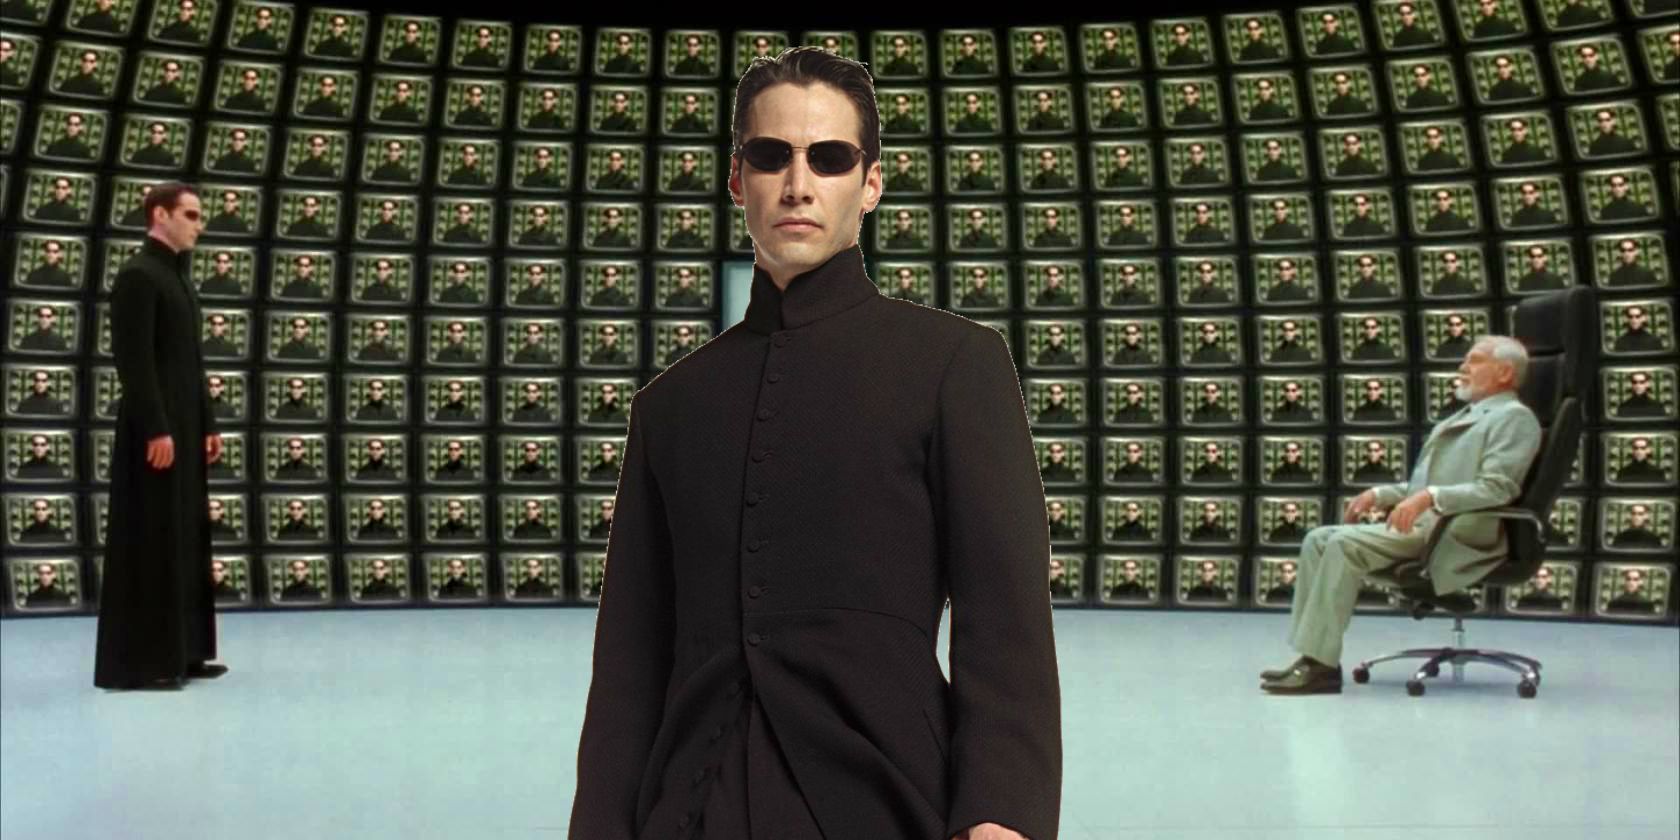 The Matrix Reloaded: The Architect's Speech & Choice Explained